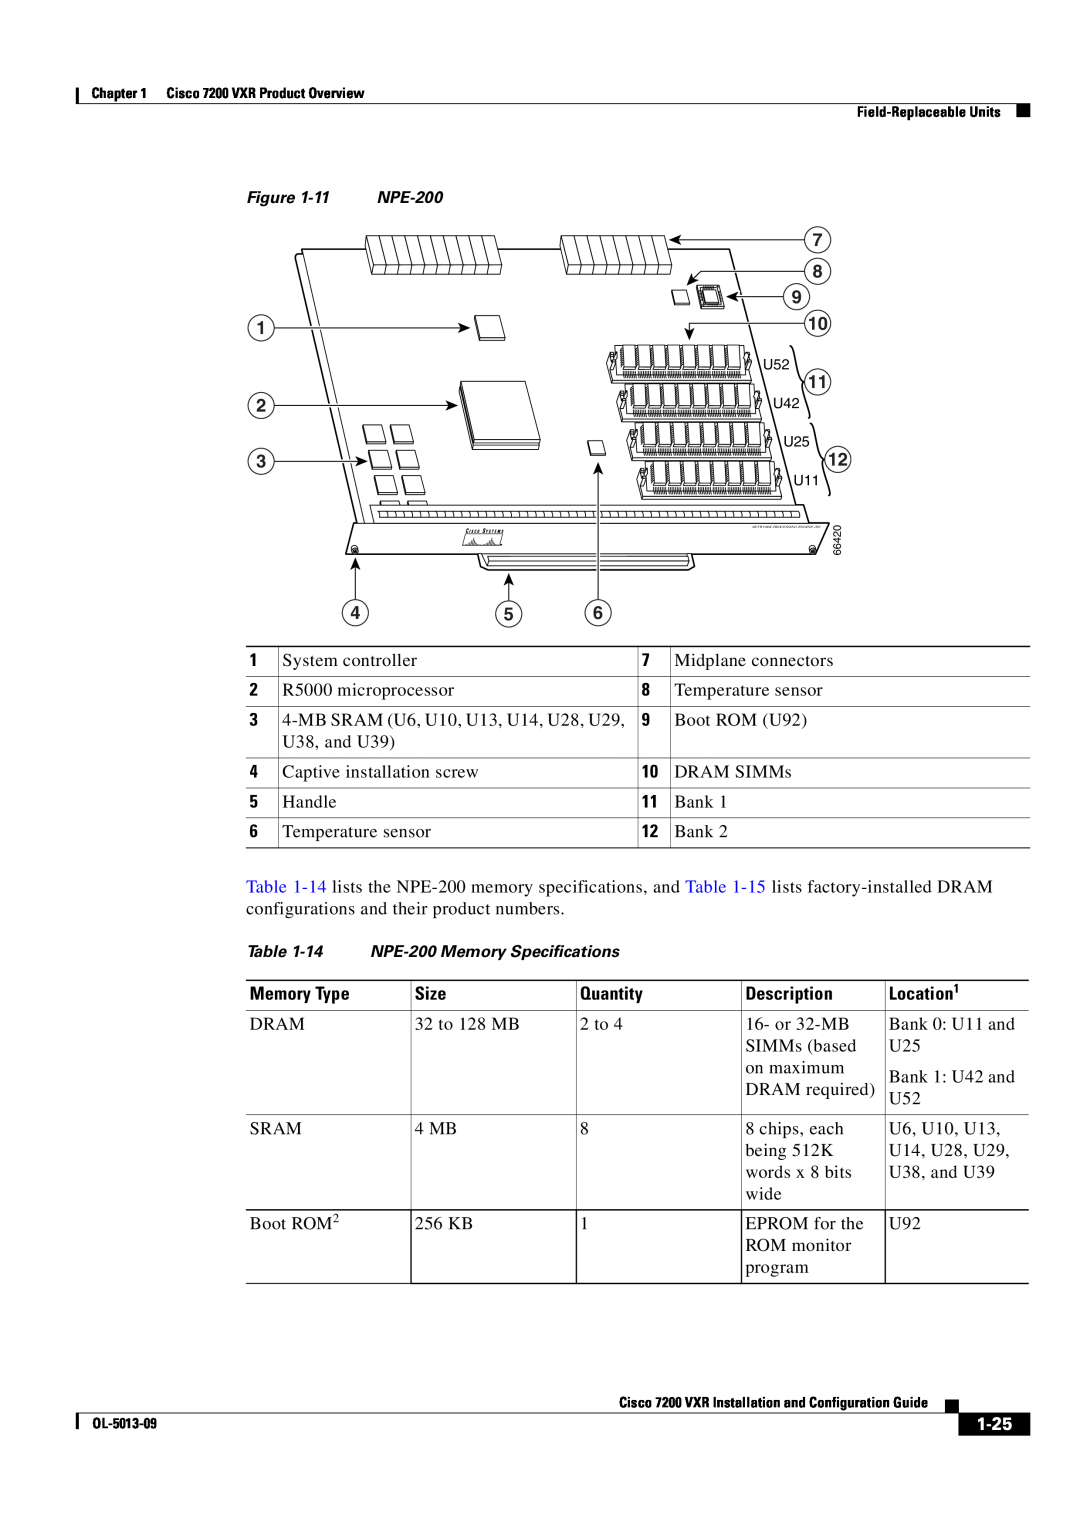 Cisco Systems 7200 VXR manual 1-25, NPE-200 Memory Specifications 